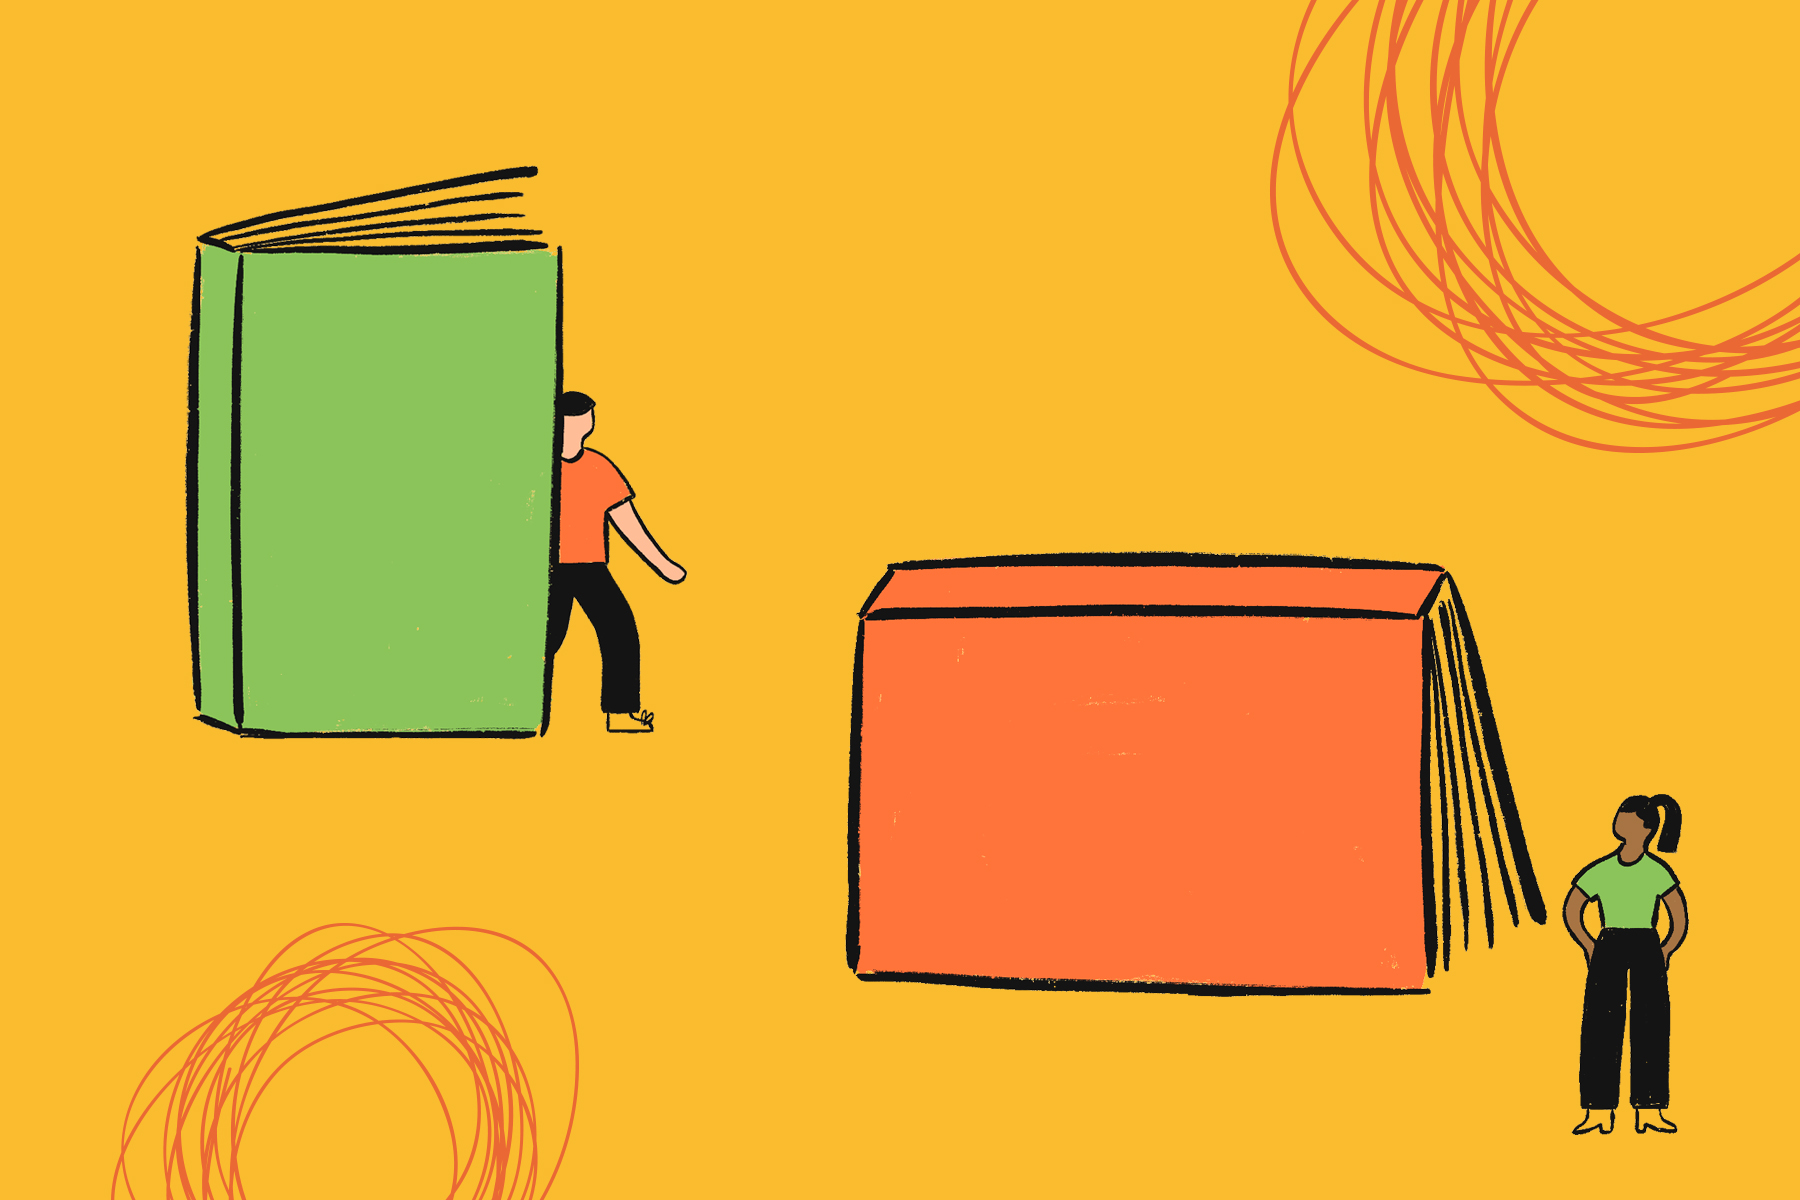 Illustration of two people walking out of giant books, looking at one another with illustrated doodles.